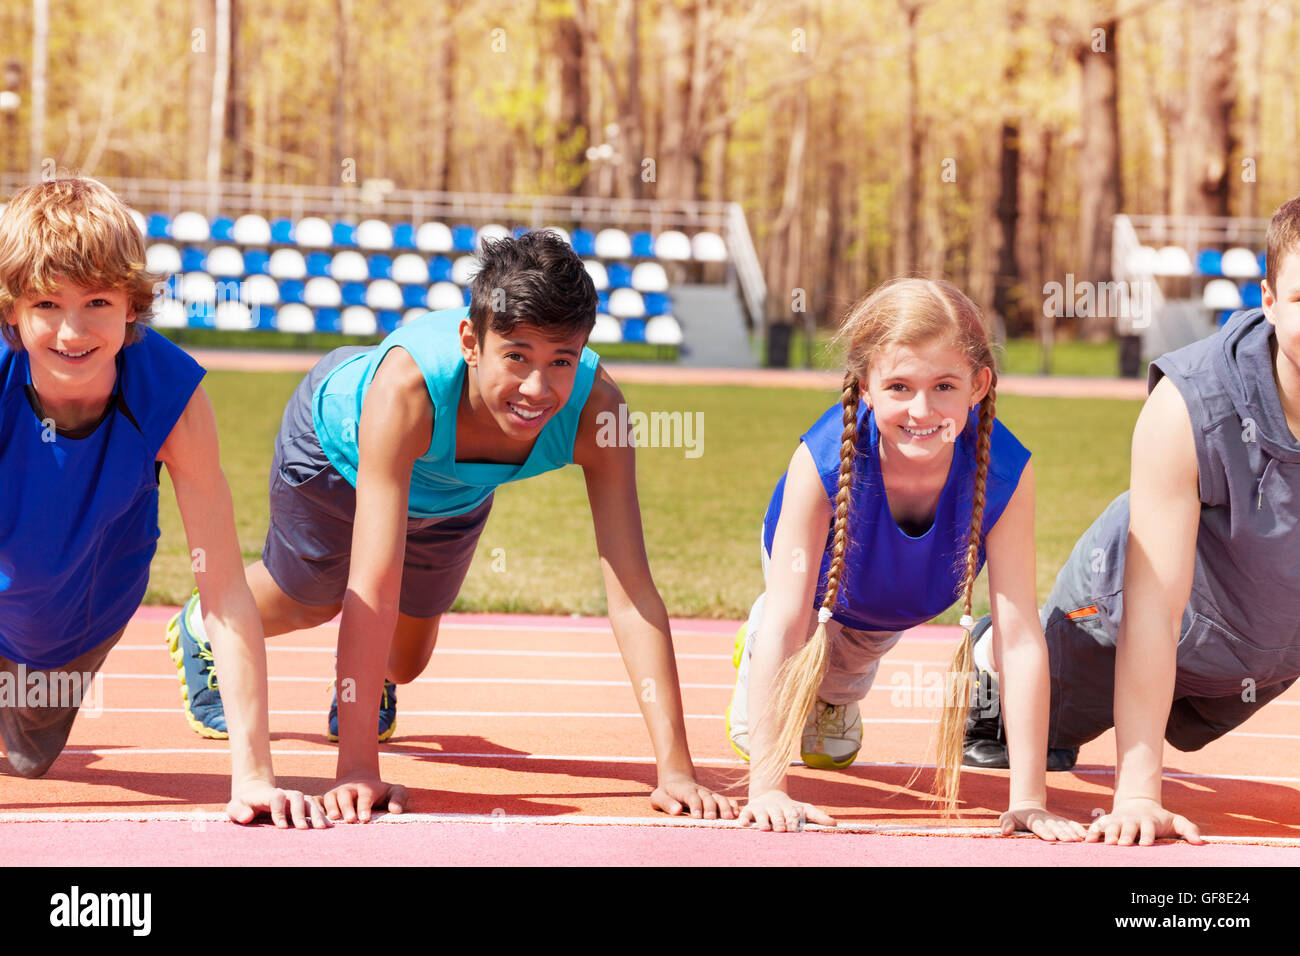 Happy teens doing push-up exercises on the track Stock Photo